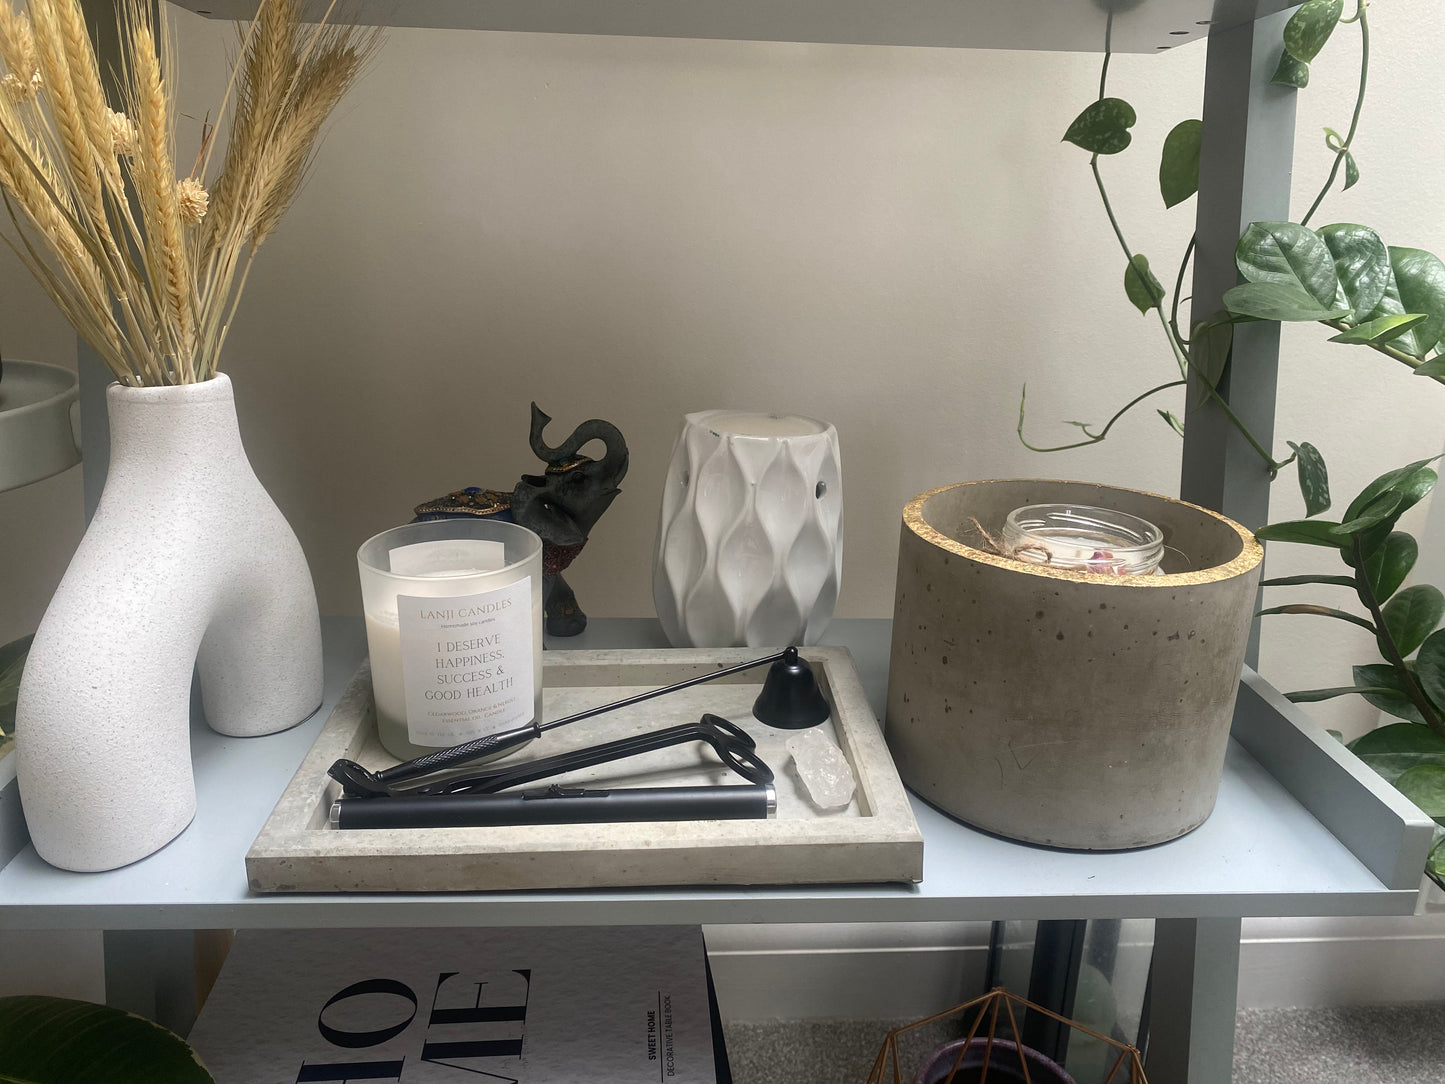 Concrete Tray & Candle Holder Gift Set | Away & Home collection